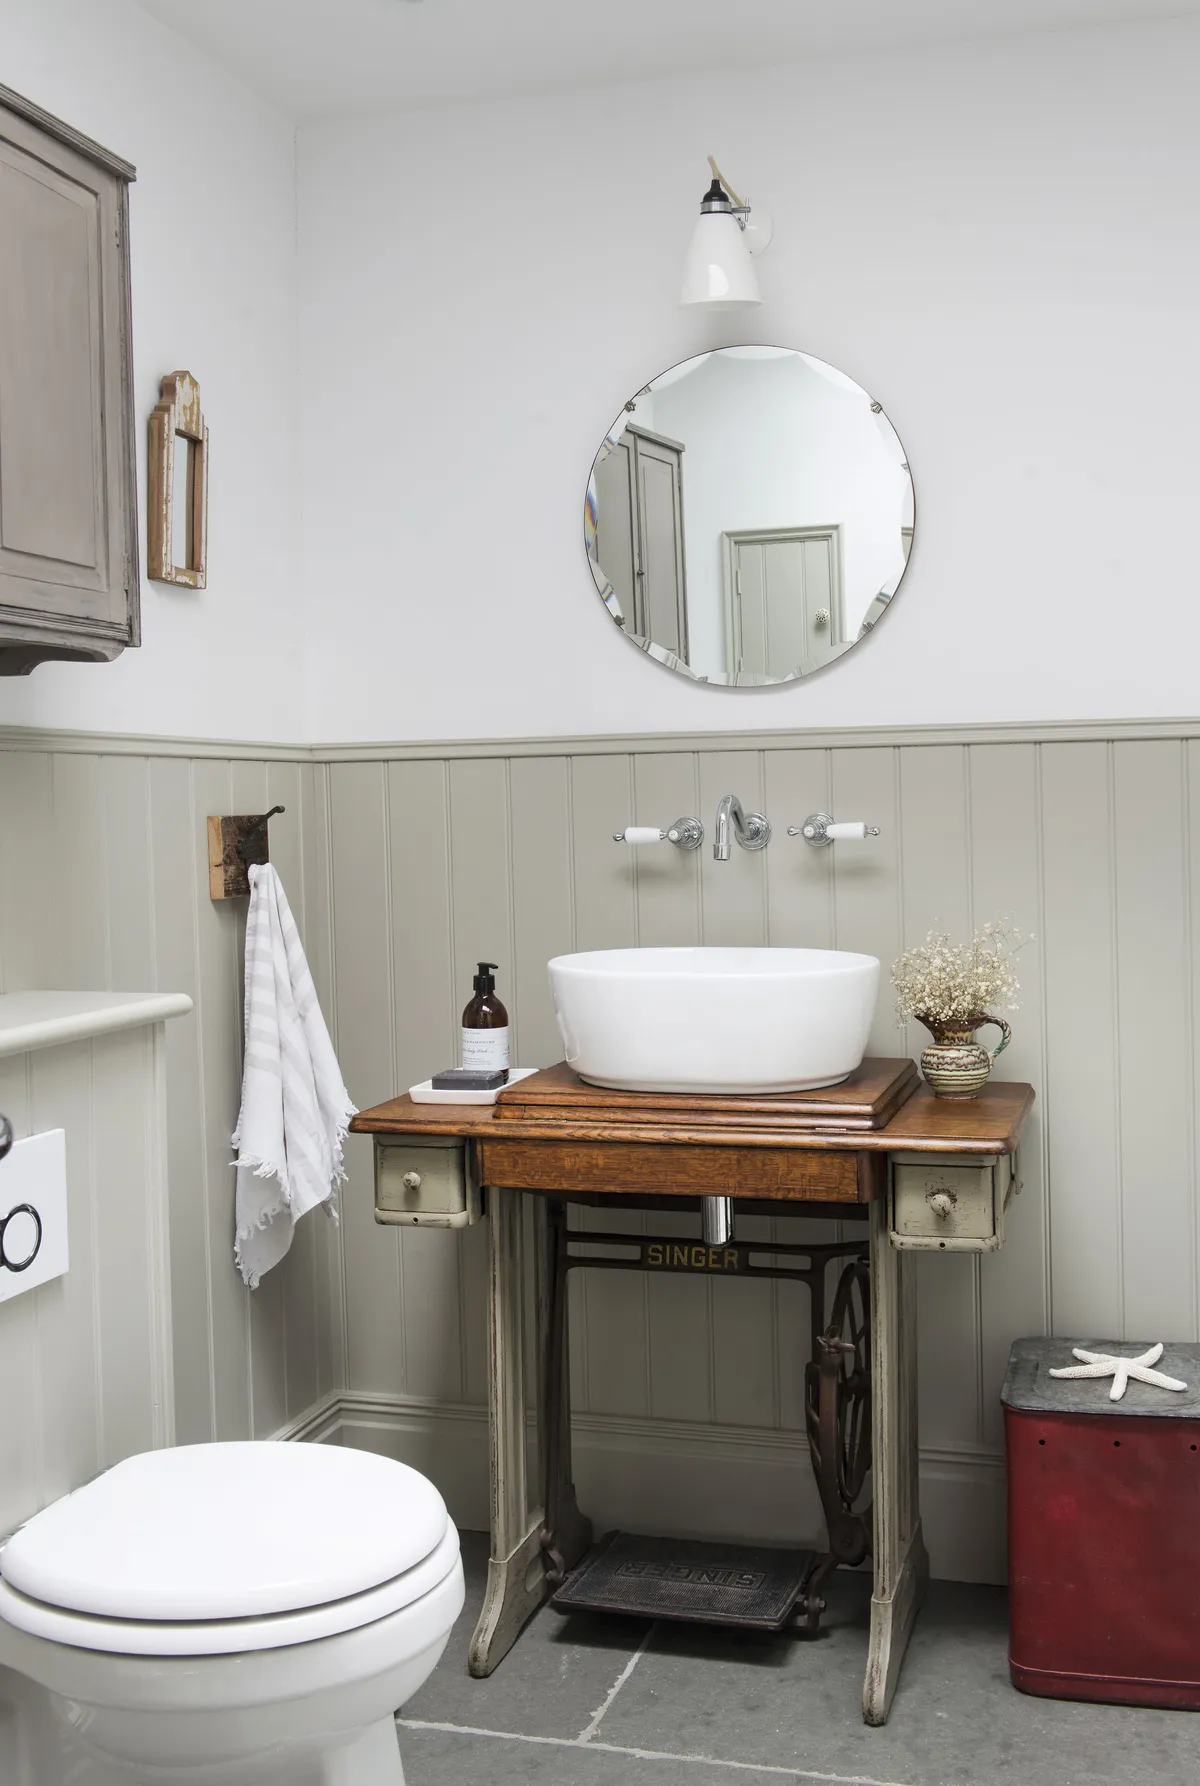 ‘We gave Paul’s mother’s Singer sewing machine a new lease of life and converted it into a basin stand in our shower room. It’s a poignant reminder of a much-loved lady,’ reveals Kay